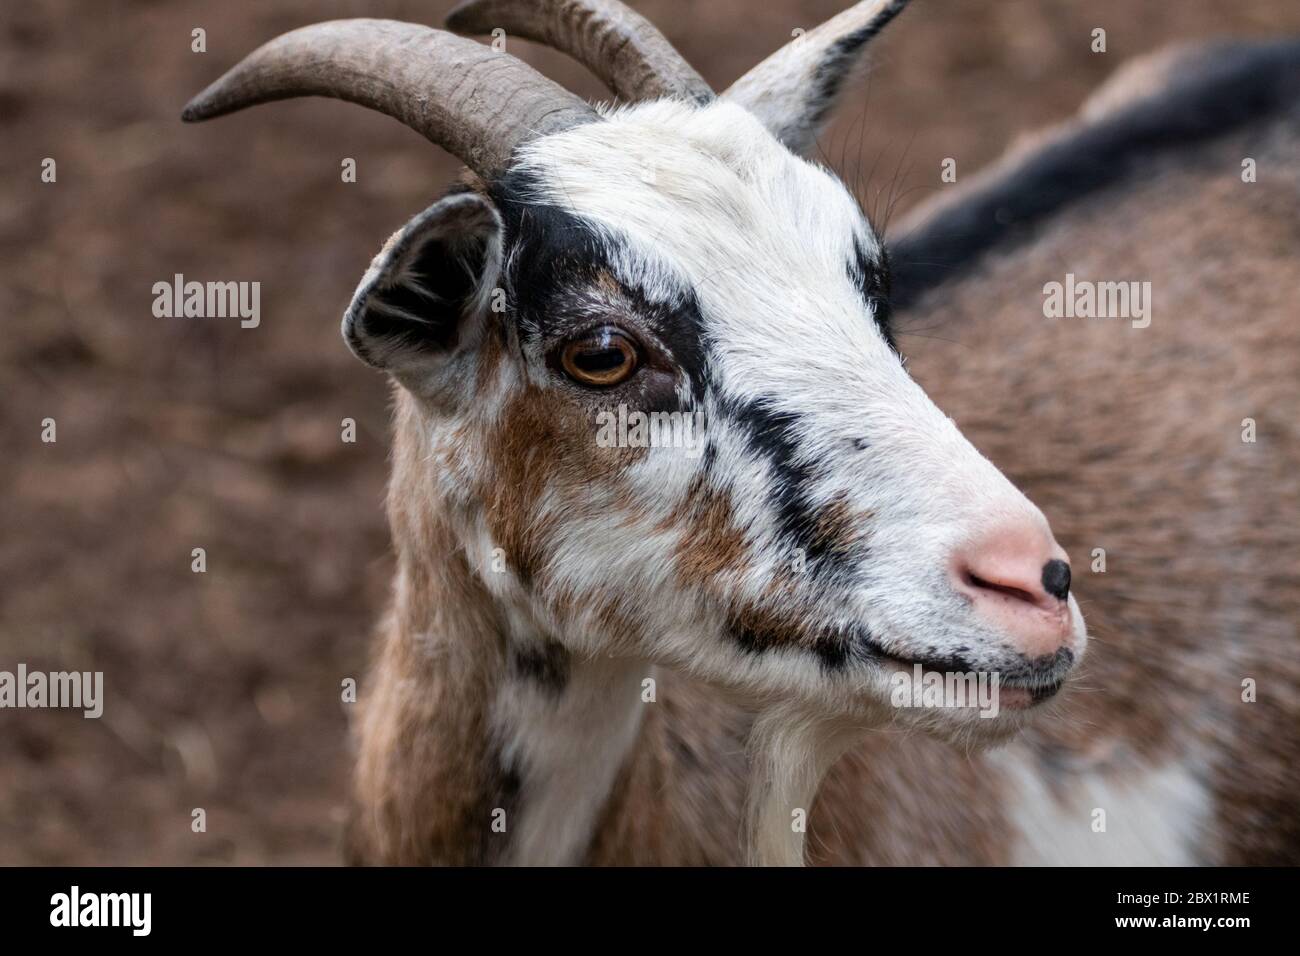 Calico spotted dappled pattern goat head close-up on blurred brown background. Domestic farm animal with horns Stock Photo